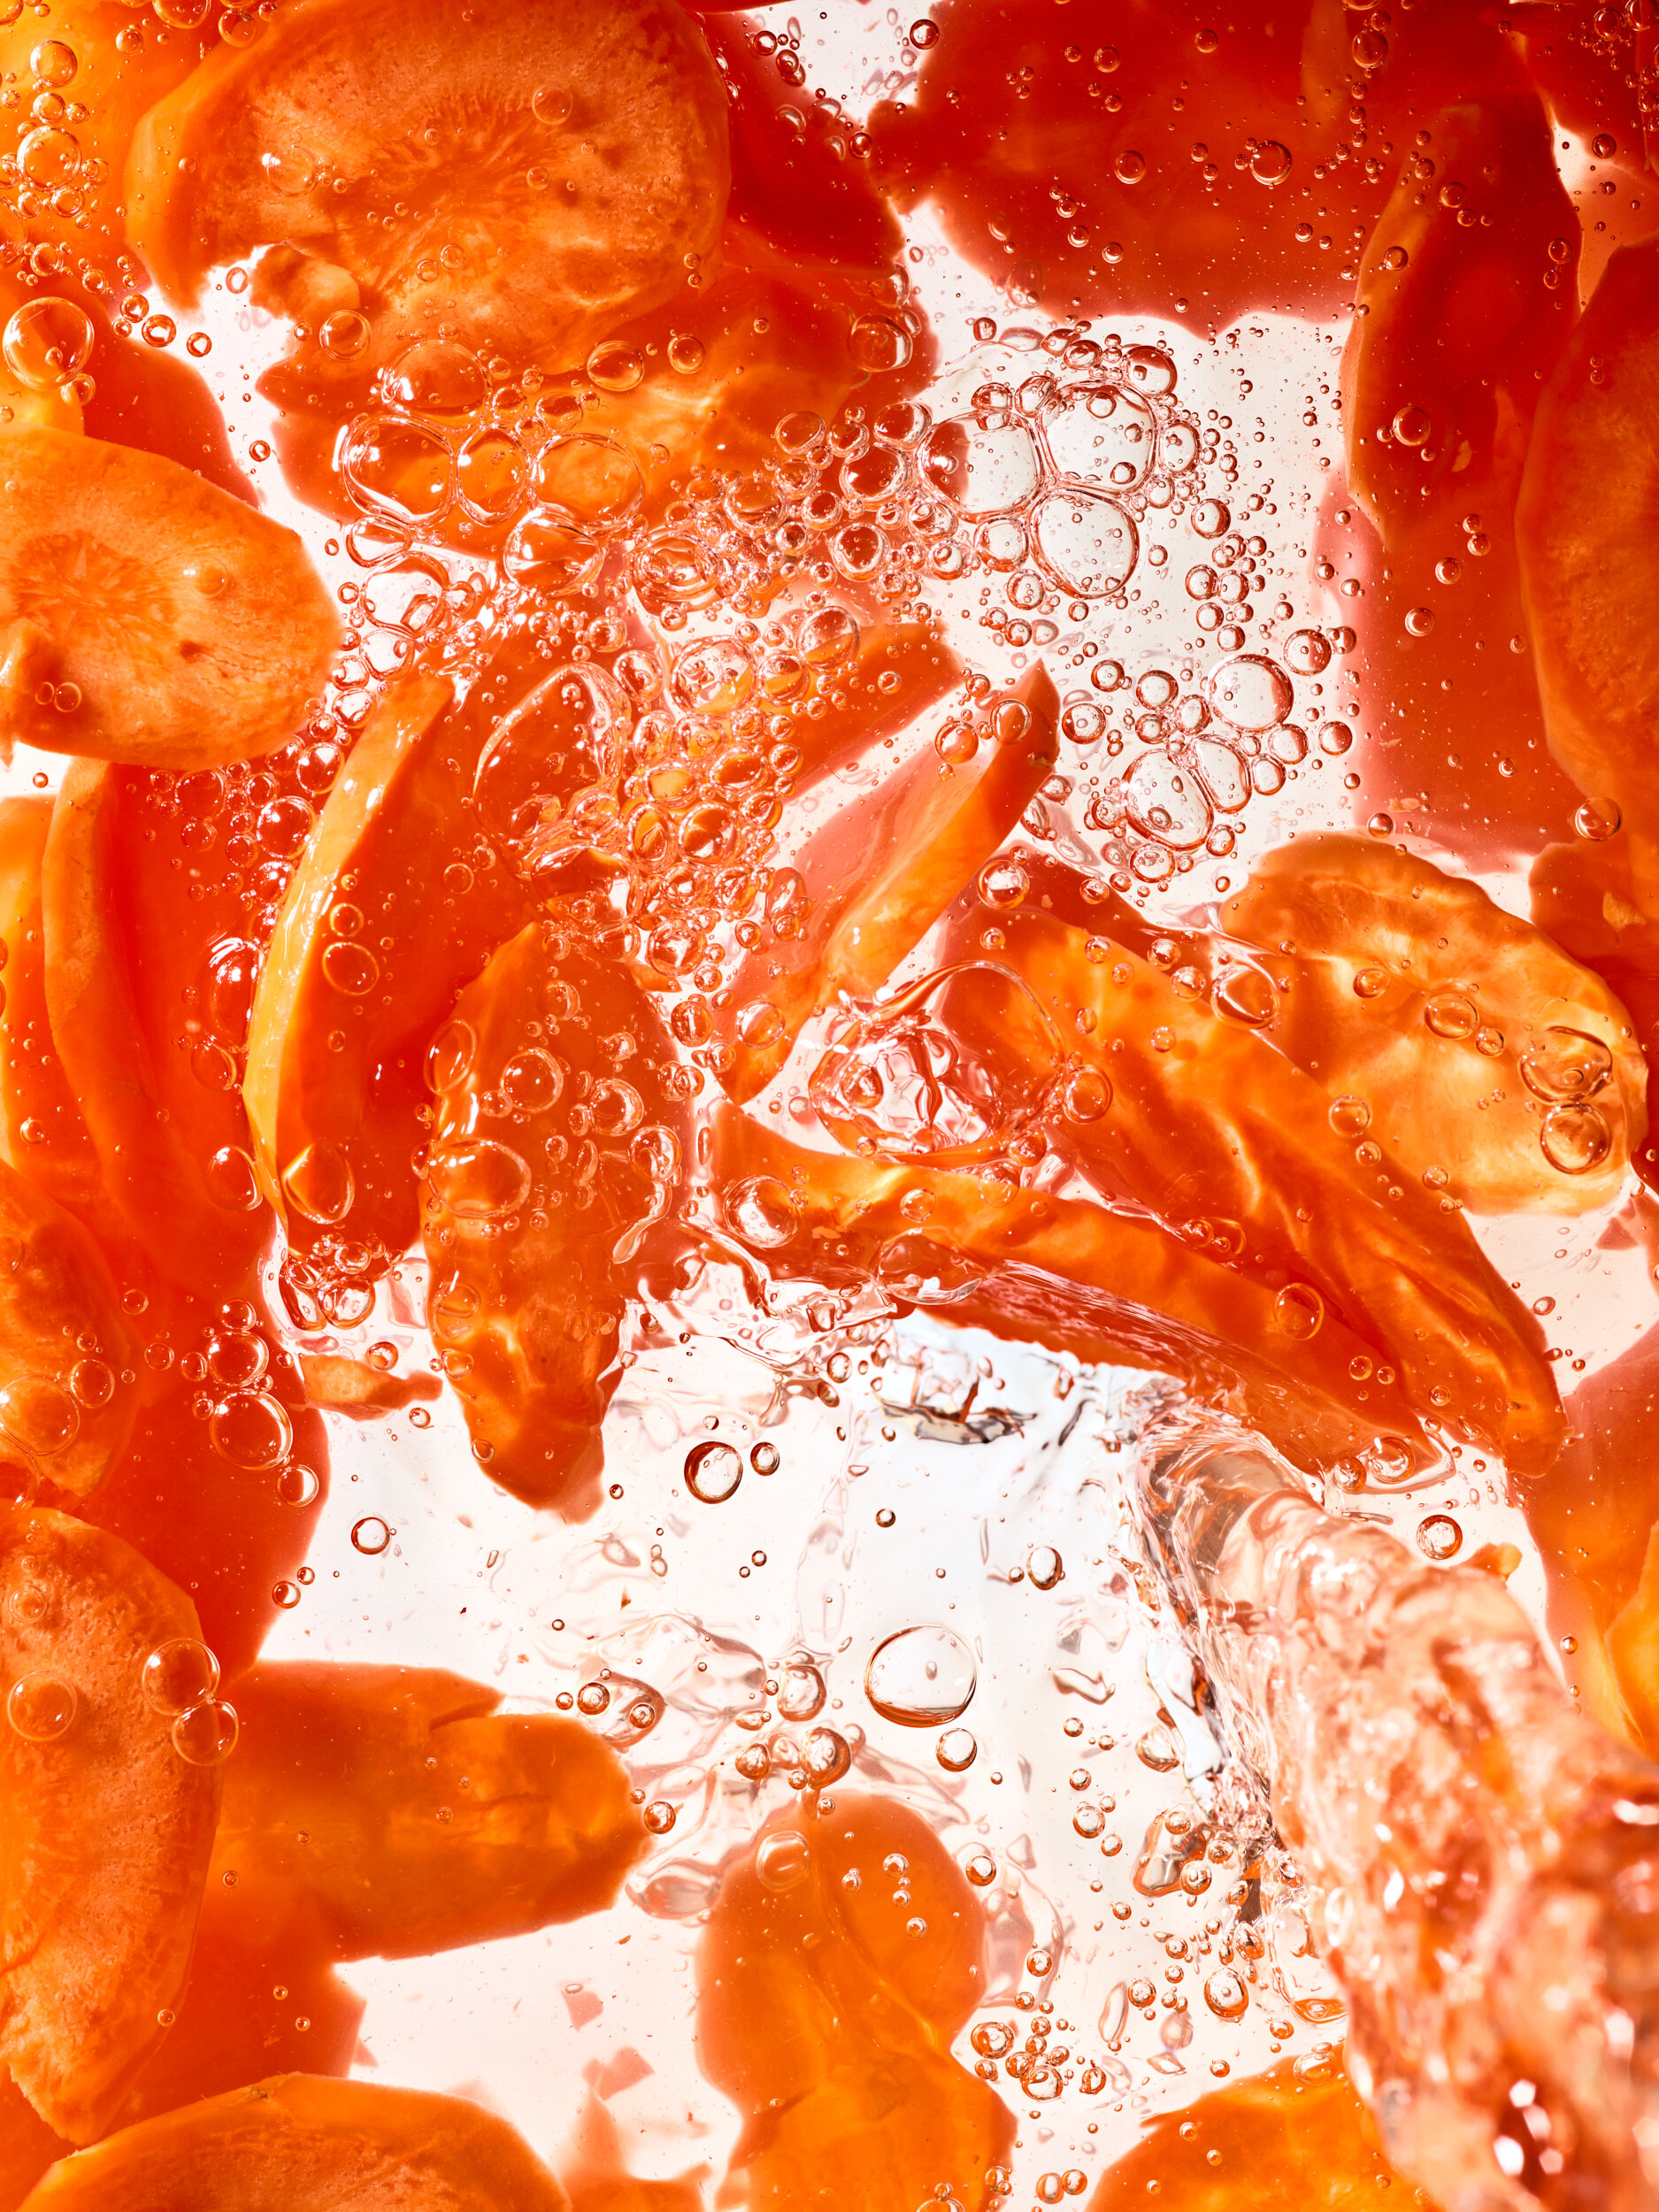 A high speed photograph of pickled carrots frozen in time being poured out of a jar.